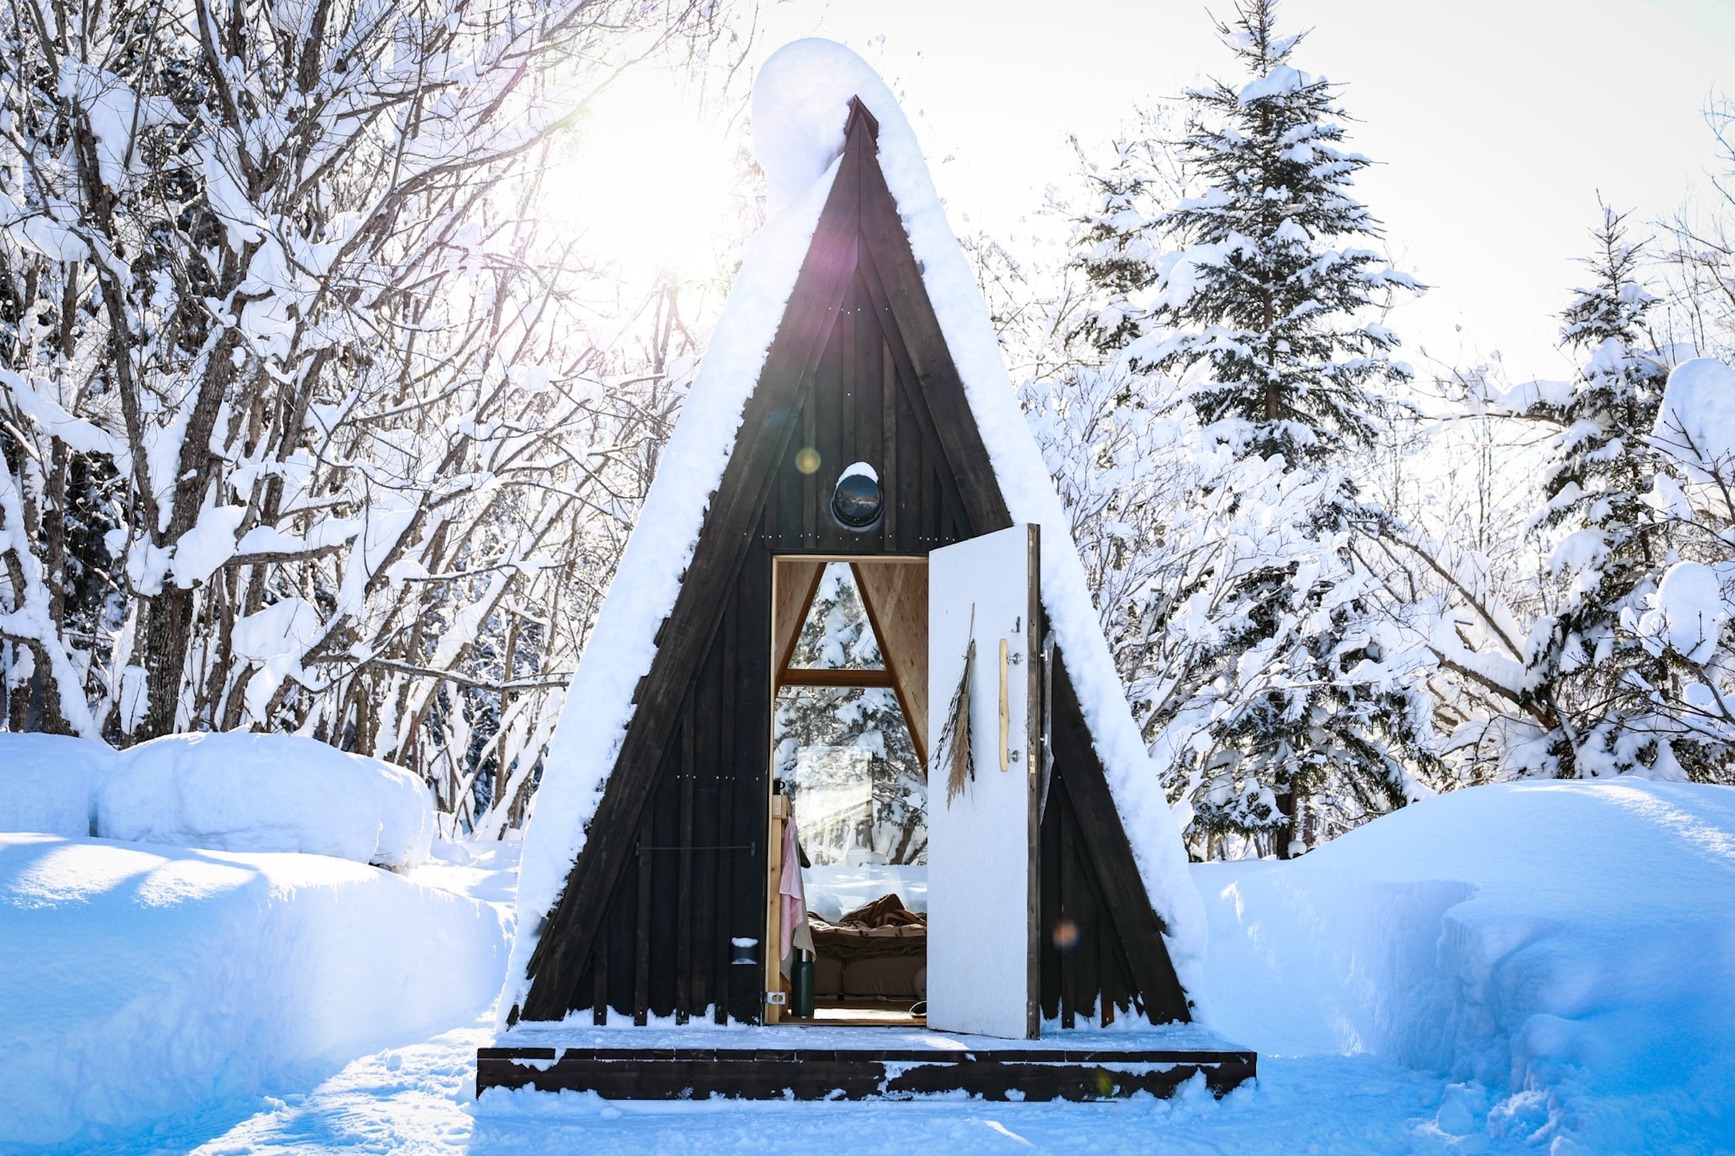 A-frame cabin iwor【Vacation STAY提供】 image